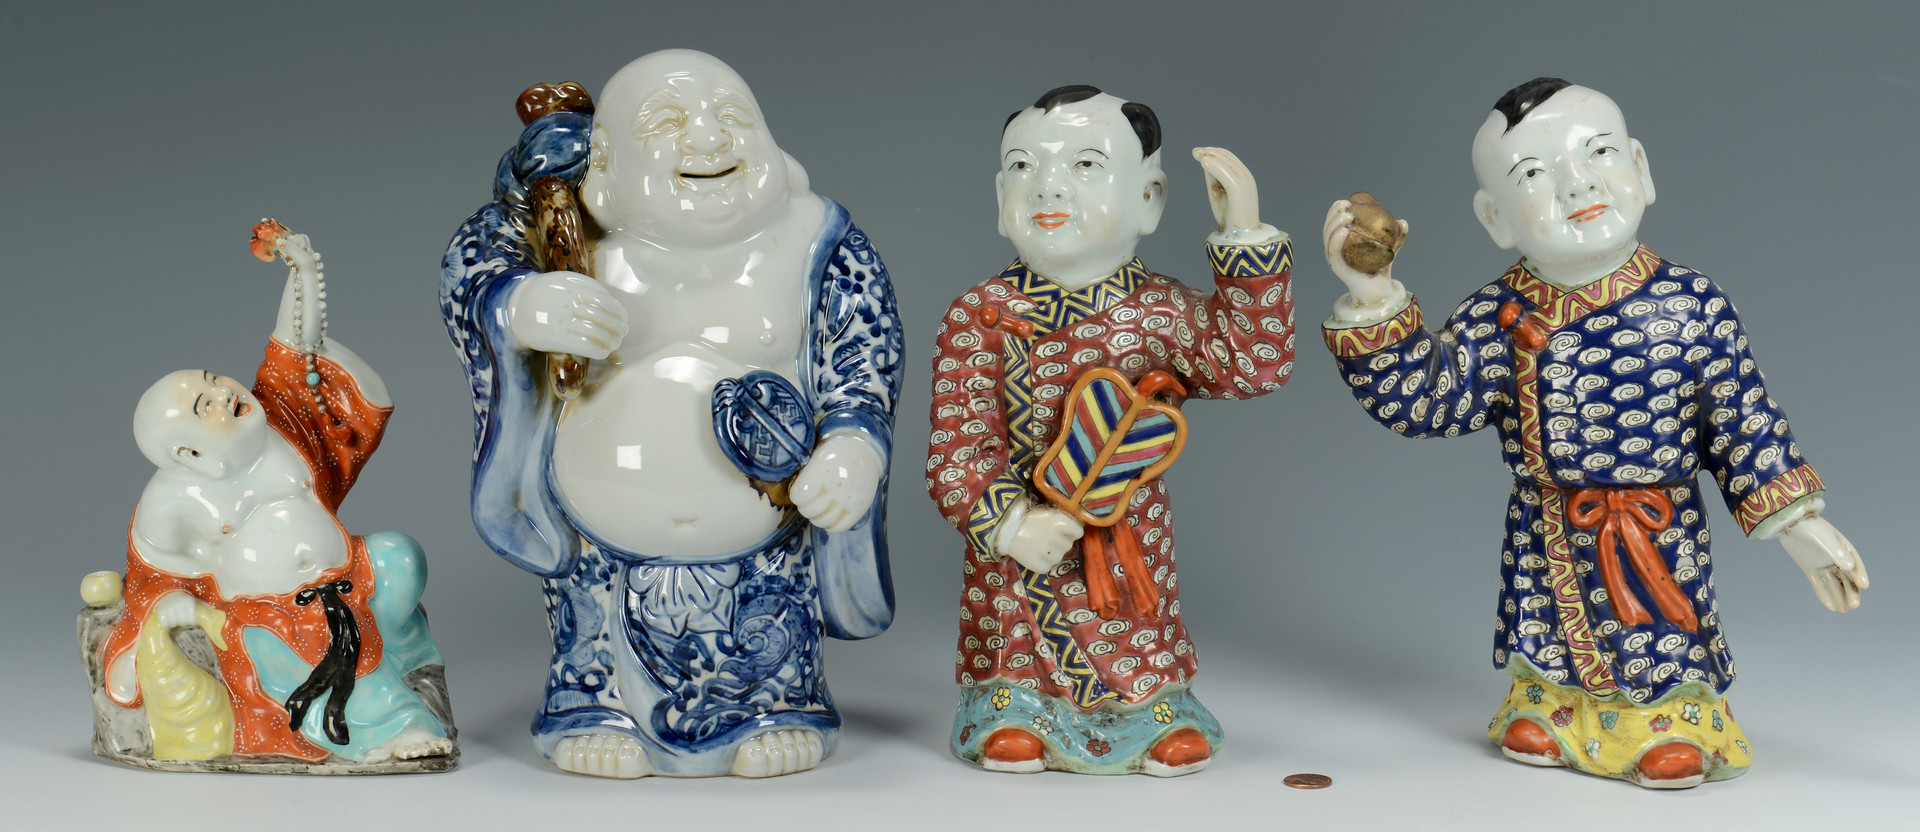 Lot 565: 4 Chinese Porcelain Figures